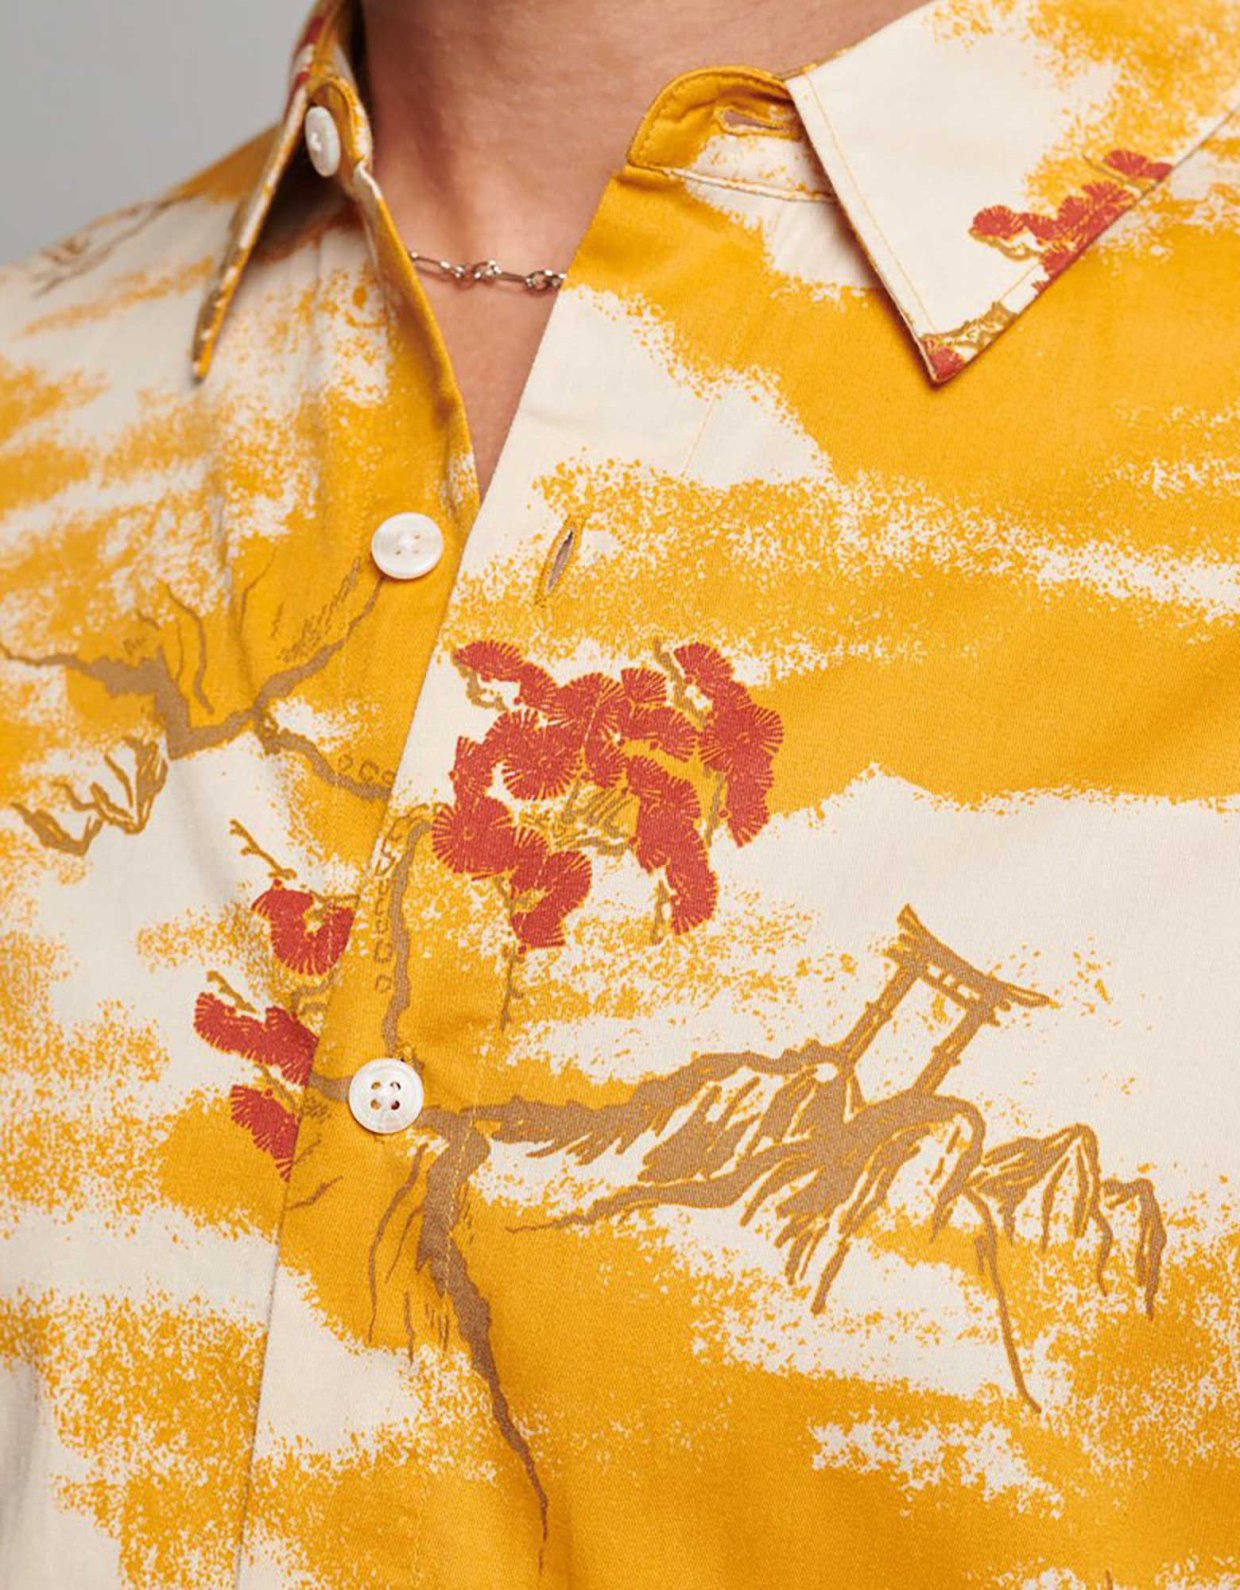 Superdry Vintage Hawaiian s/s shirt yellow clouds